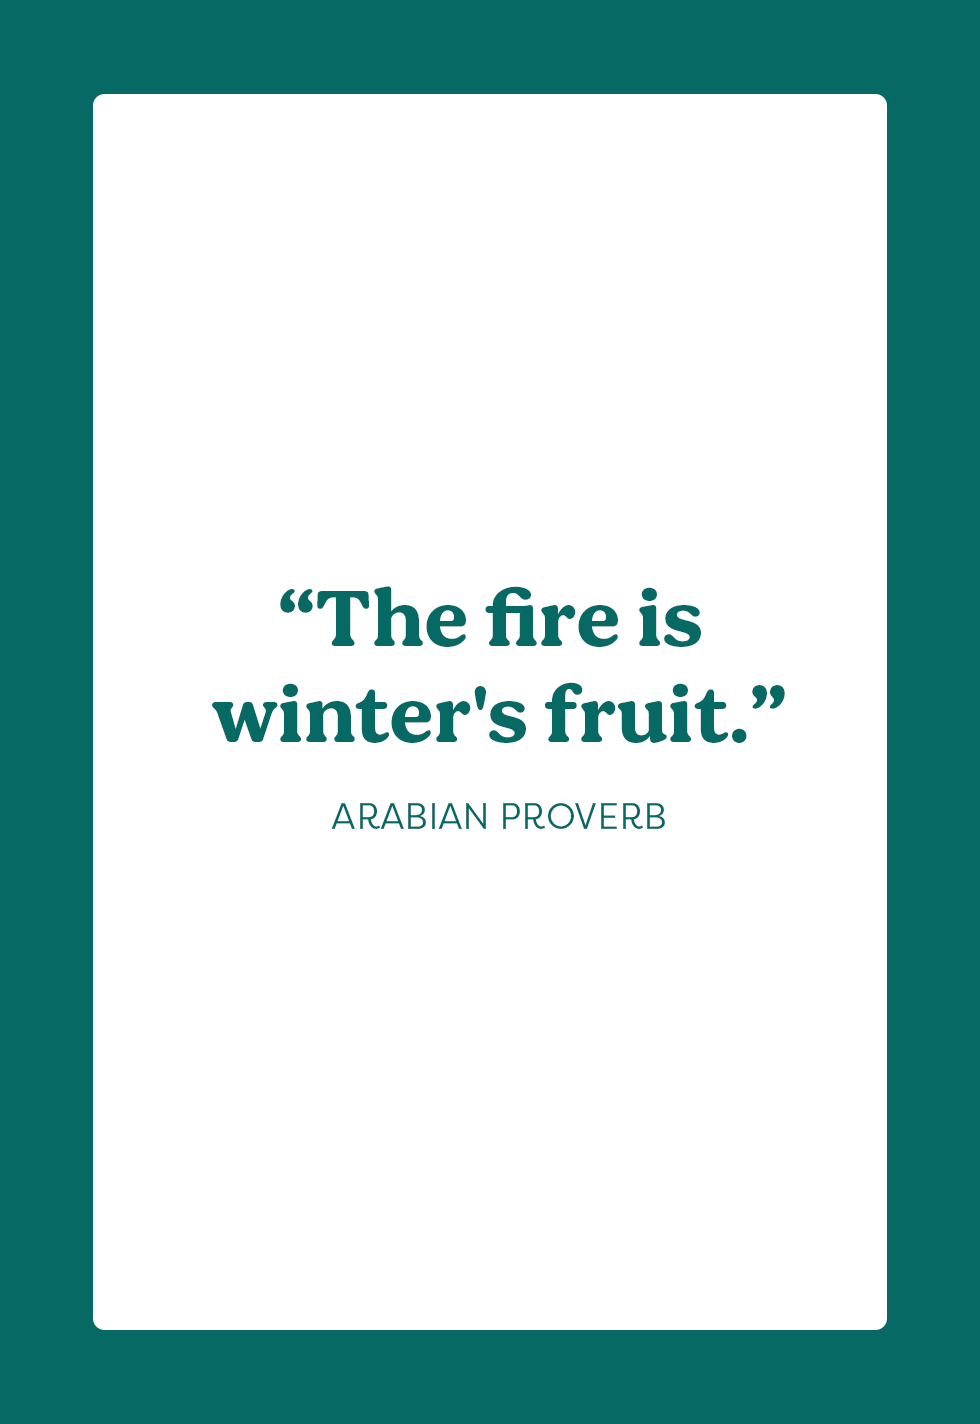 25 Best Winter Quotes and Cute Snowy Sayings